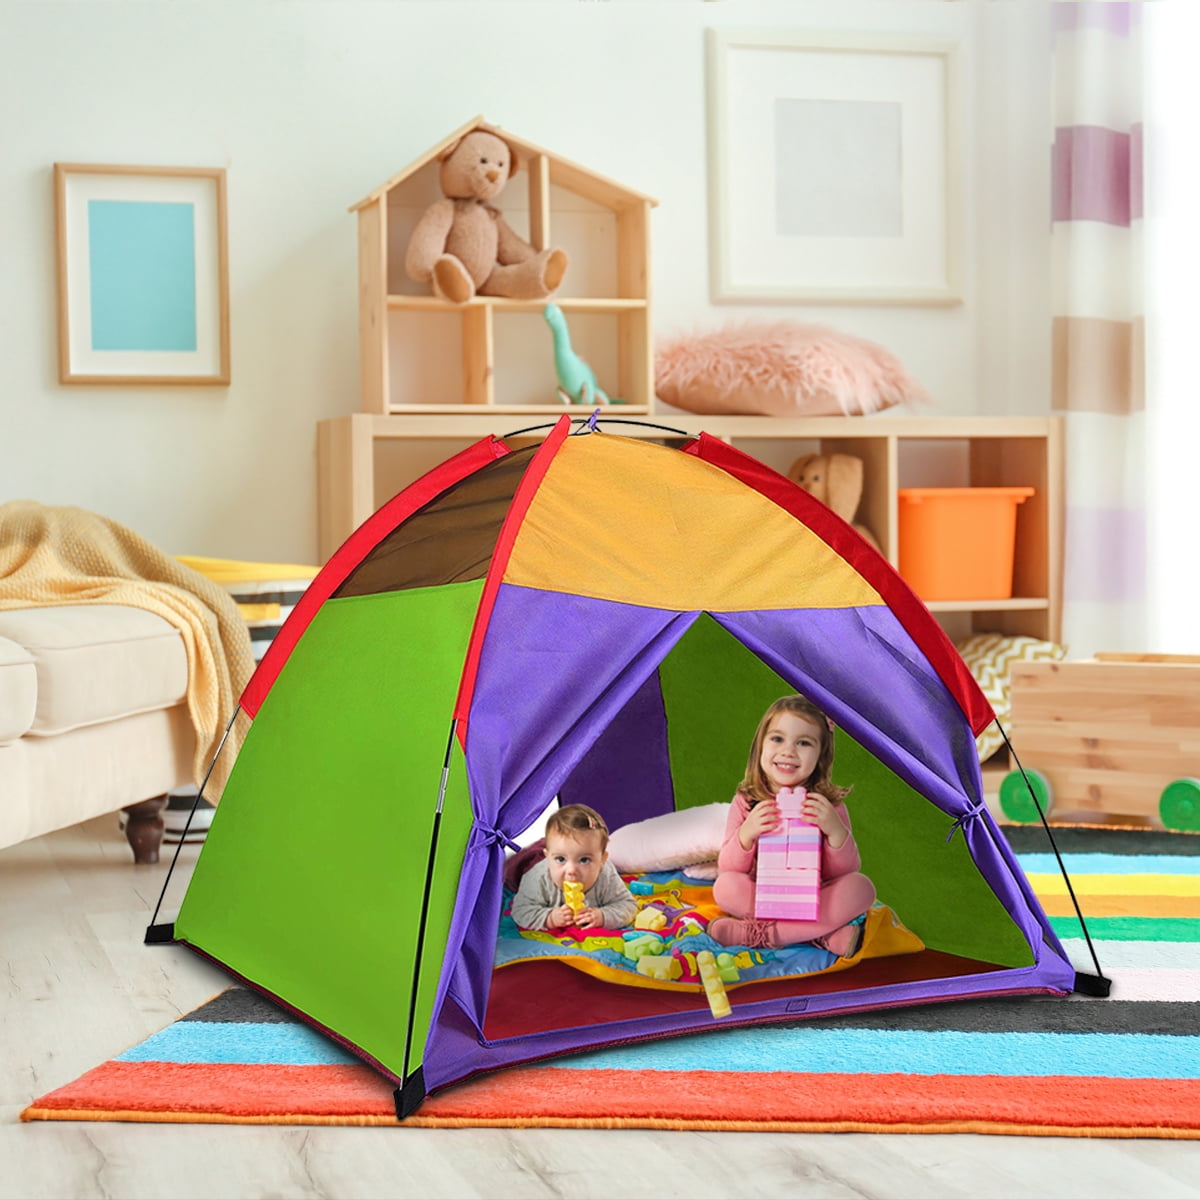 Pacific Play Tents 20435 Jungle Safari Tent Tunnel Combo PP 20435pp for sale online 